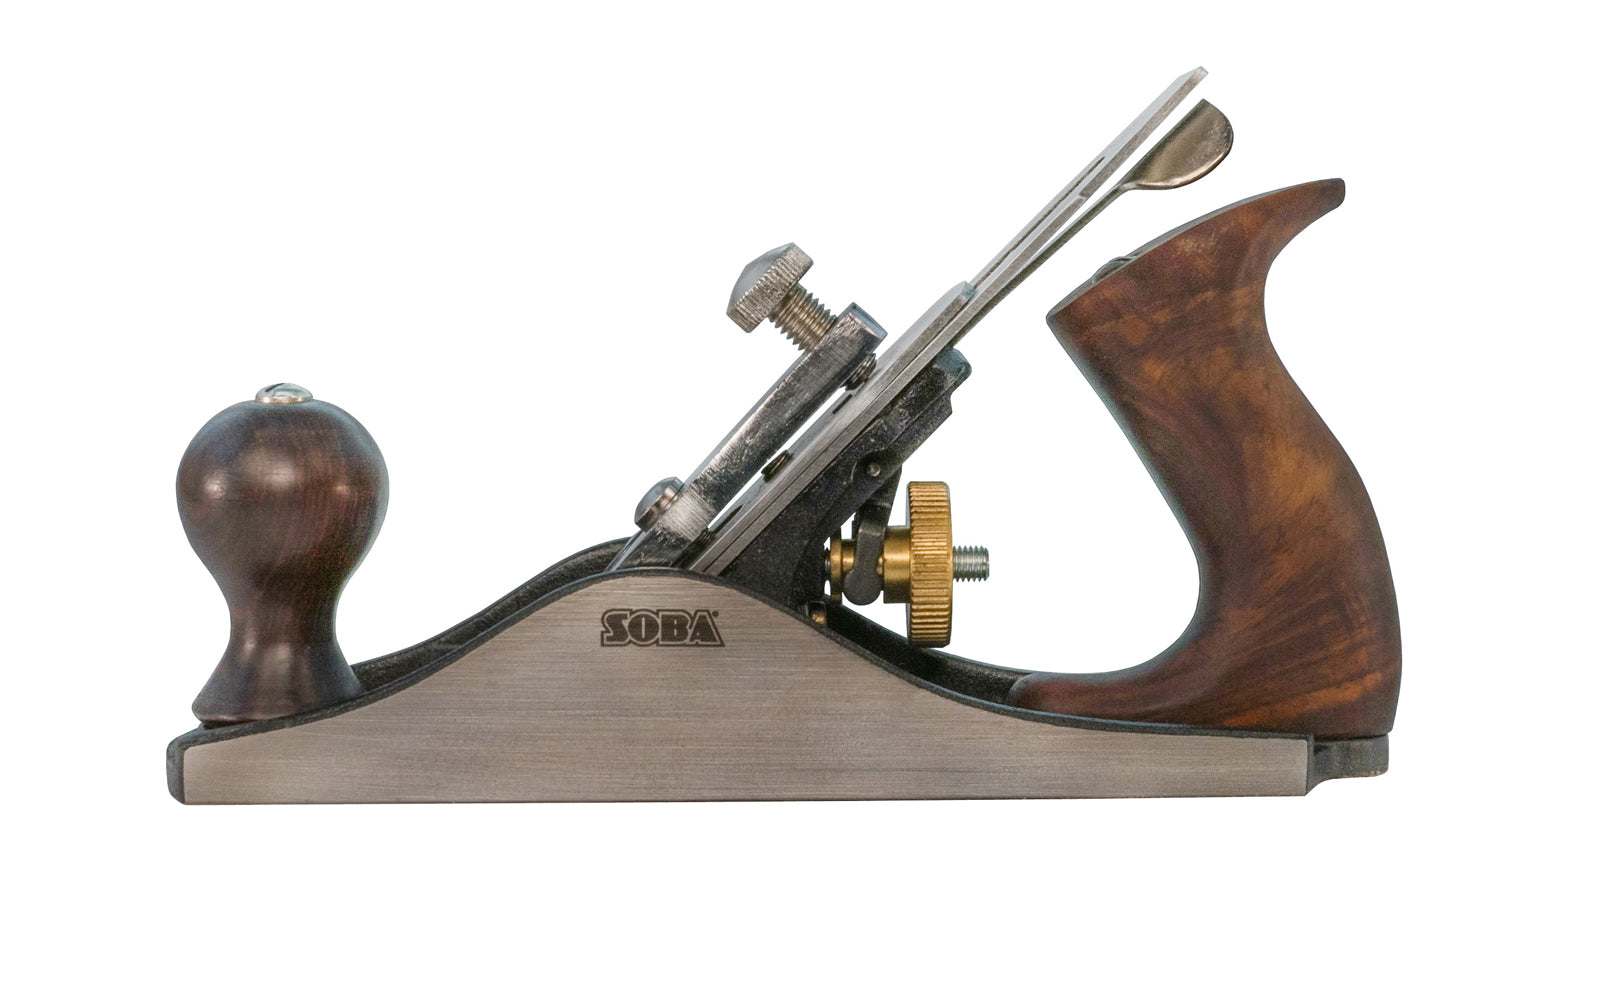 This No. 3 smoothing plane body is ribbed to ensure strength & rigidity. positive positioning helps prevent chattering. Iron is made of high carbon steel, hardened & tempered under precise control for accuracy & uniformity. Handle & knob are hardwood. #3 traditional smooth plane. 744391123220. Made by Rider / Soba